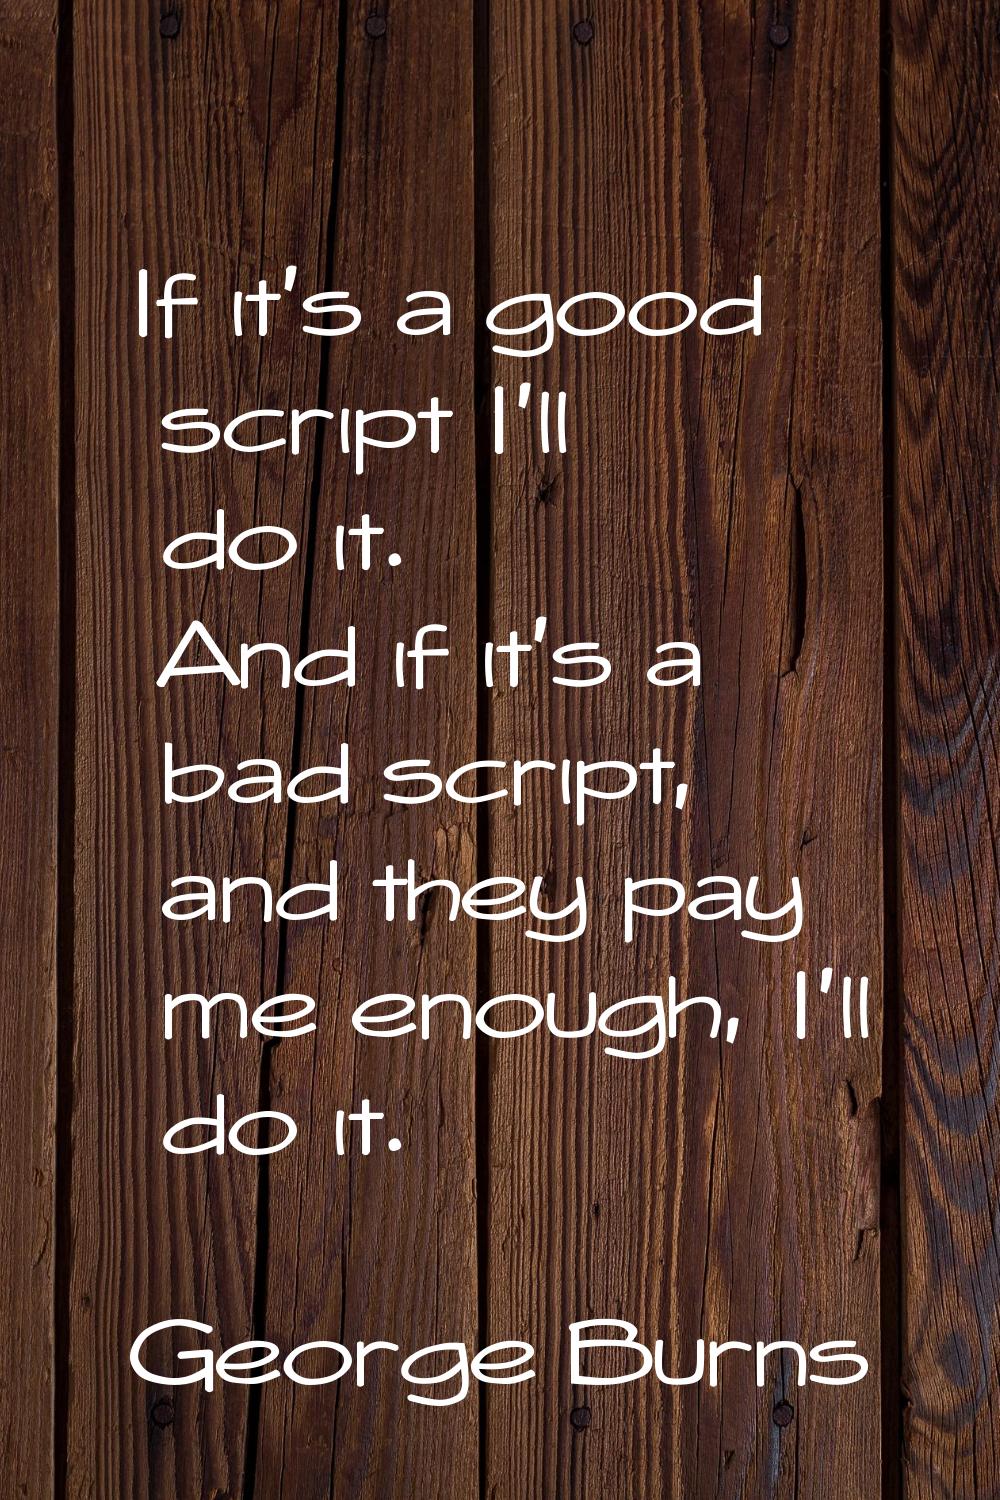 If it's a good script I'll do it. And if it's a bad script, and they pay me enough, I'll do it.